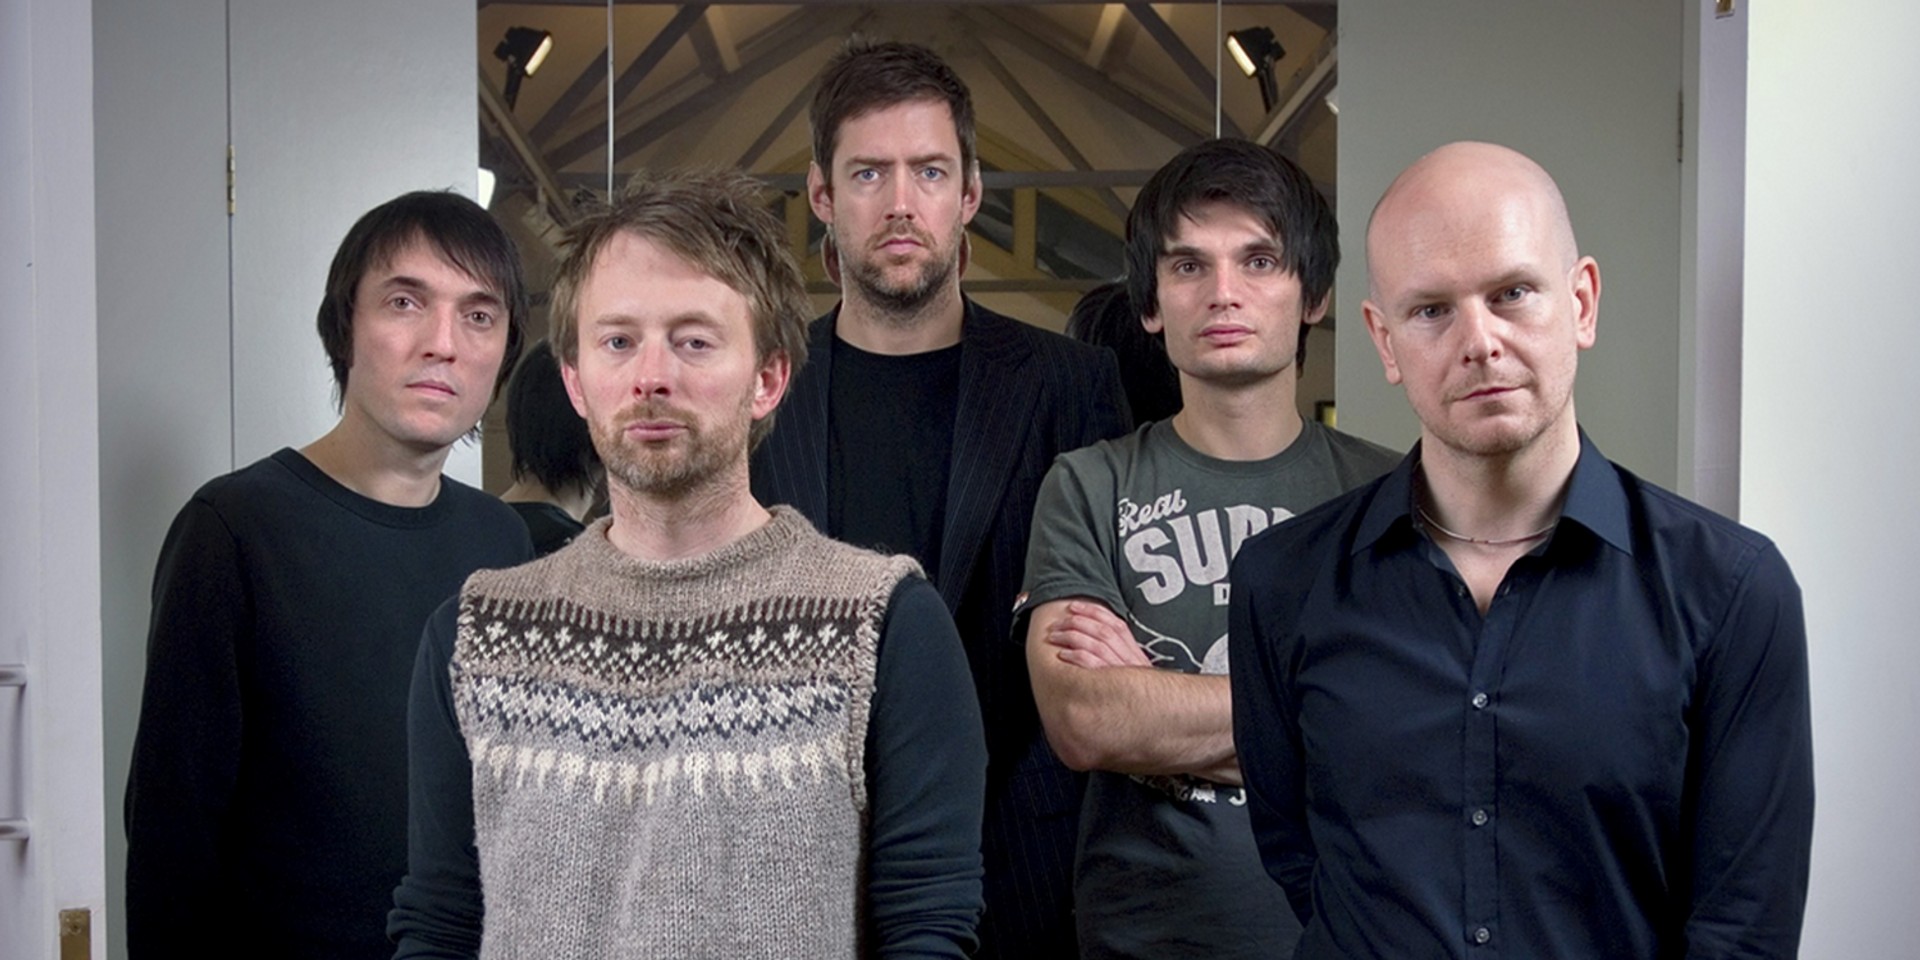 WATCH: Radiohead's sprawling, orchestral new single, 'Burn The Witch'